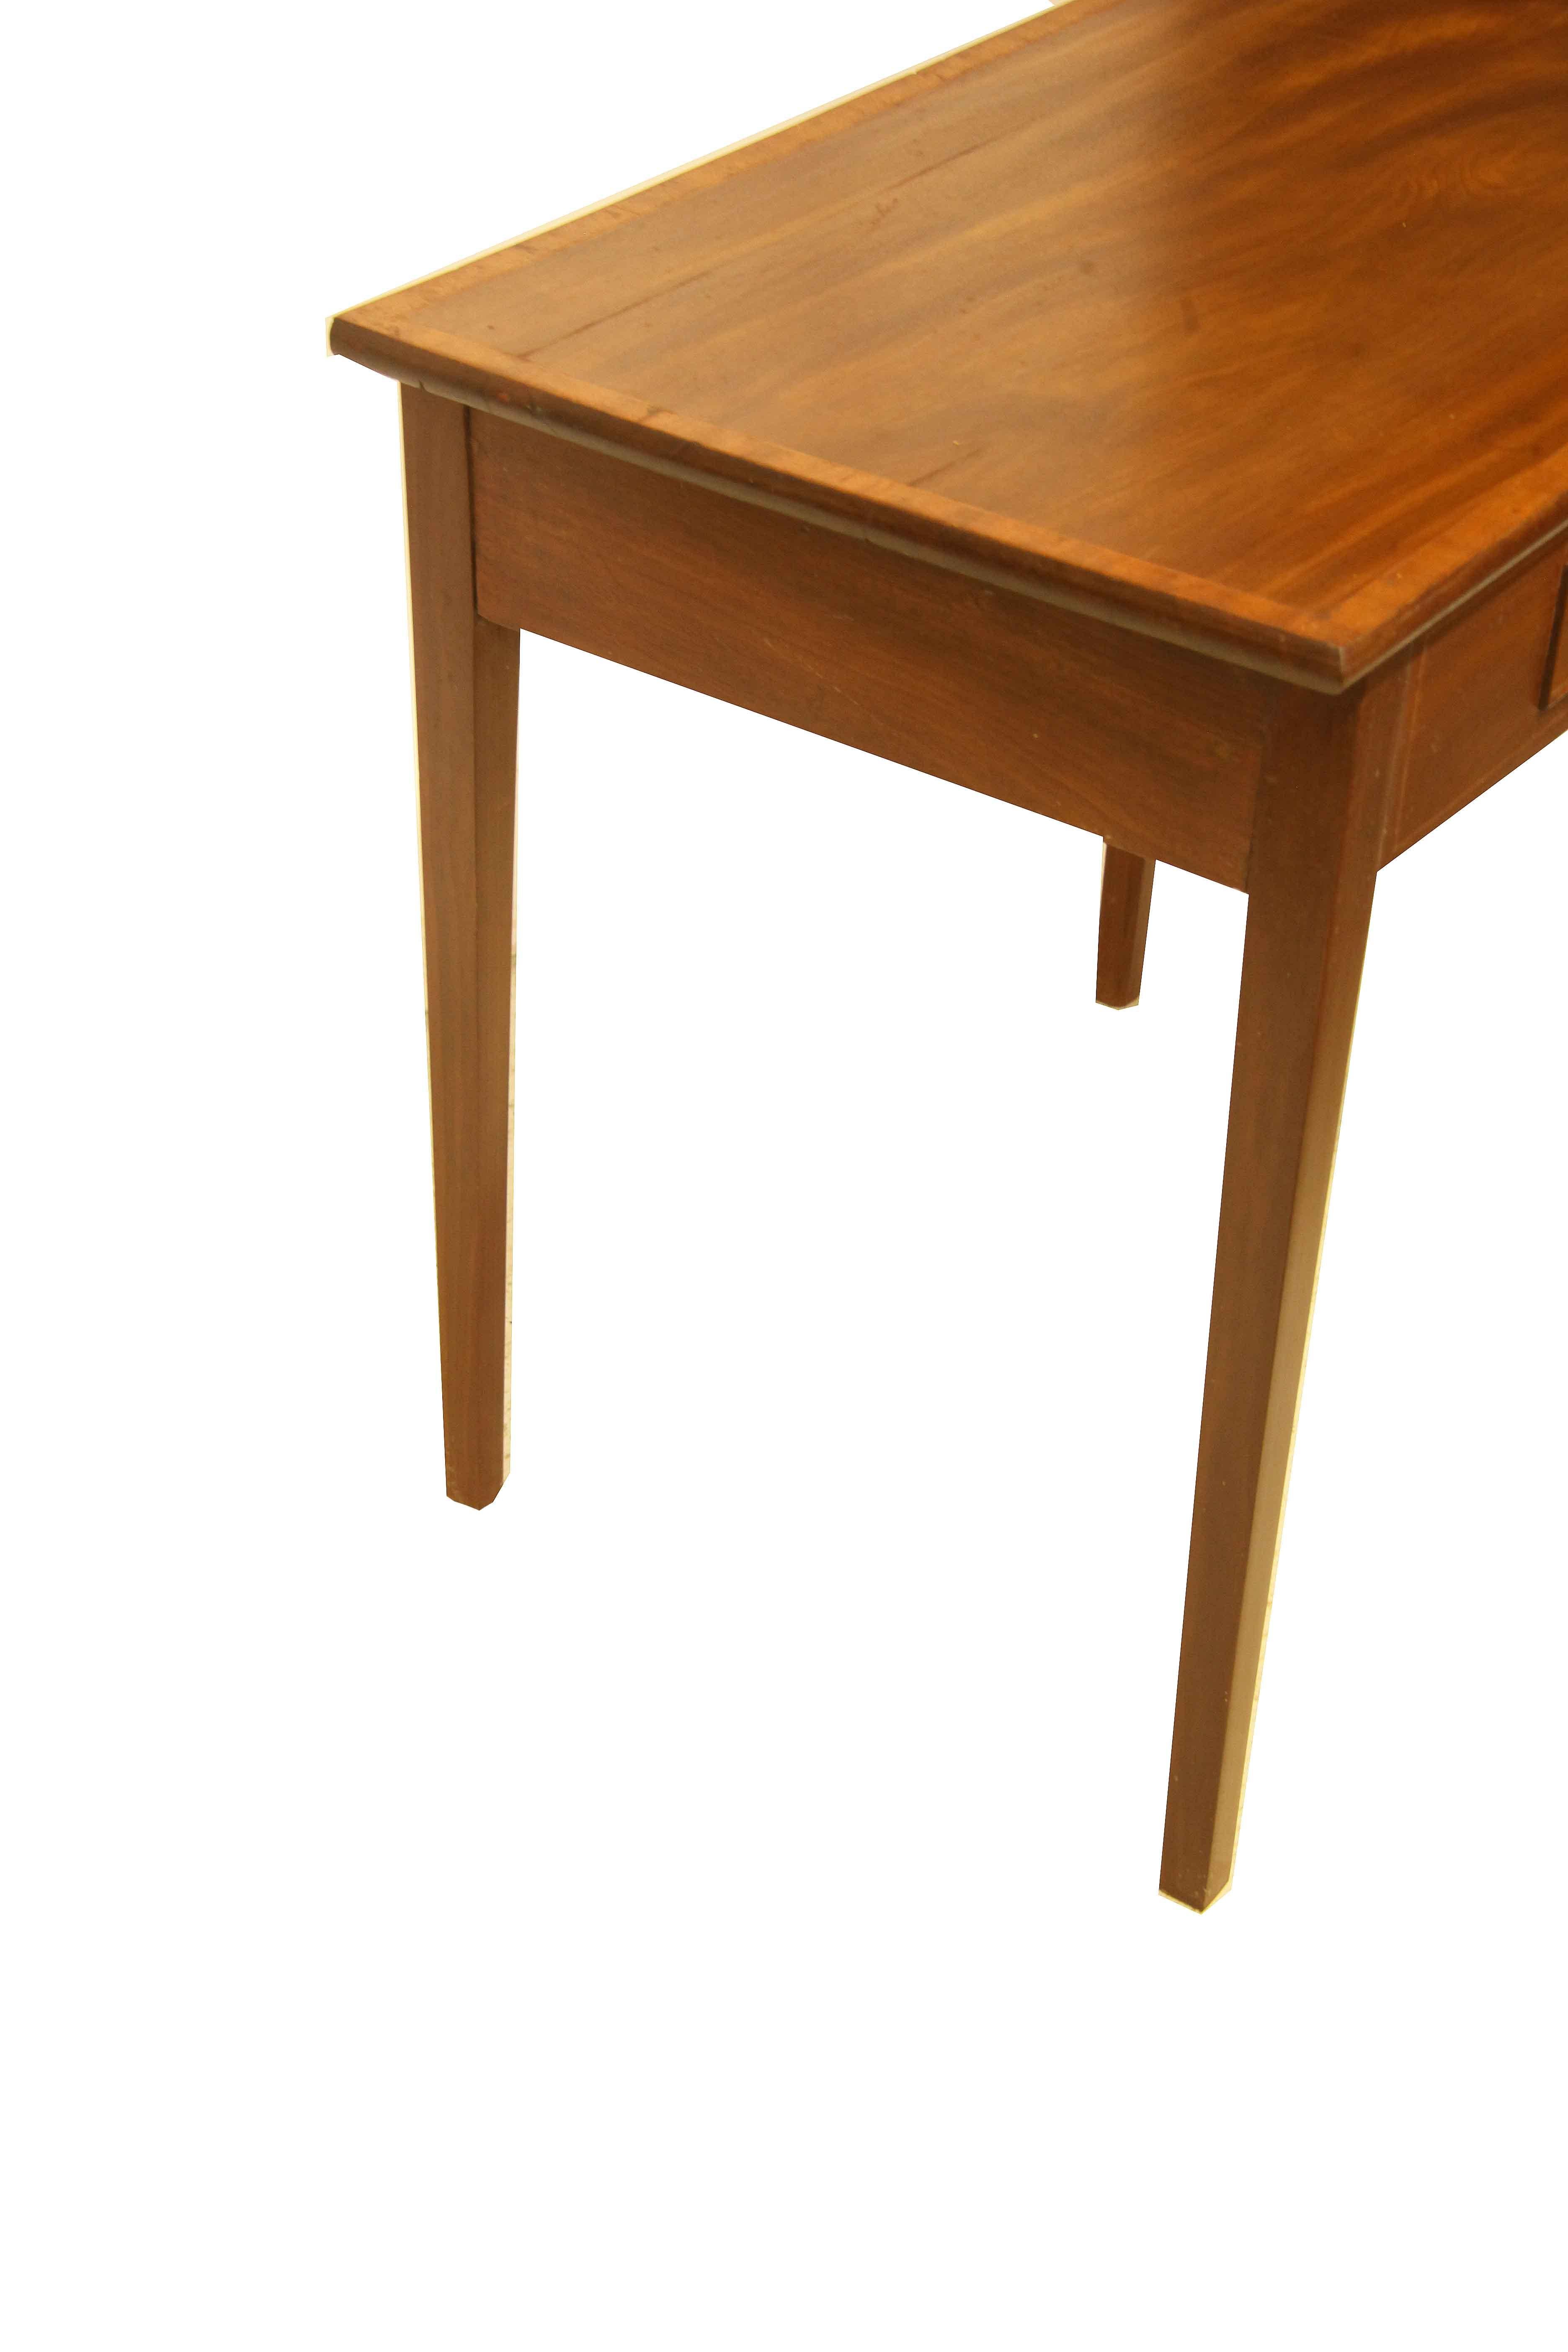 English one drawer table, the top features a beautiful swirl grain and color with a band of satinwood and boxwood cross banding around the perimeter. The front is inlaid with boxwood as well. The single drawer has a swan neck pull that is hand made